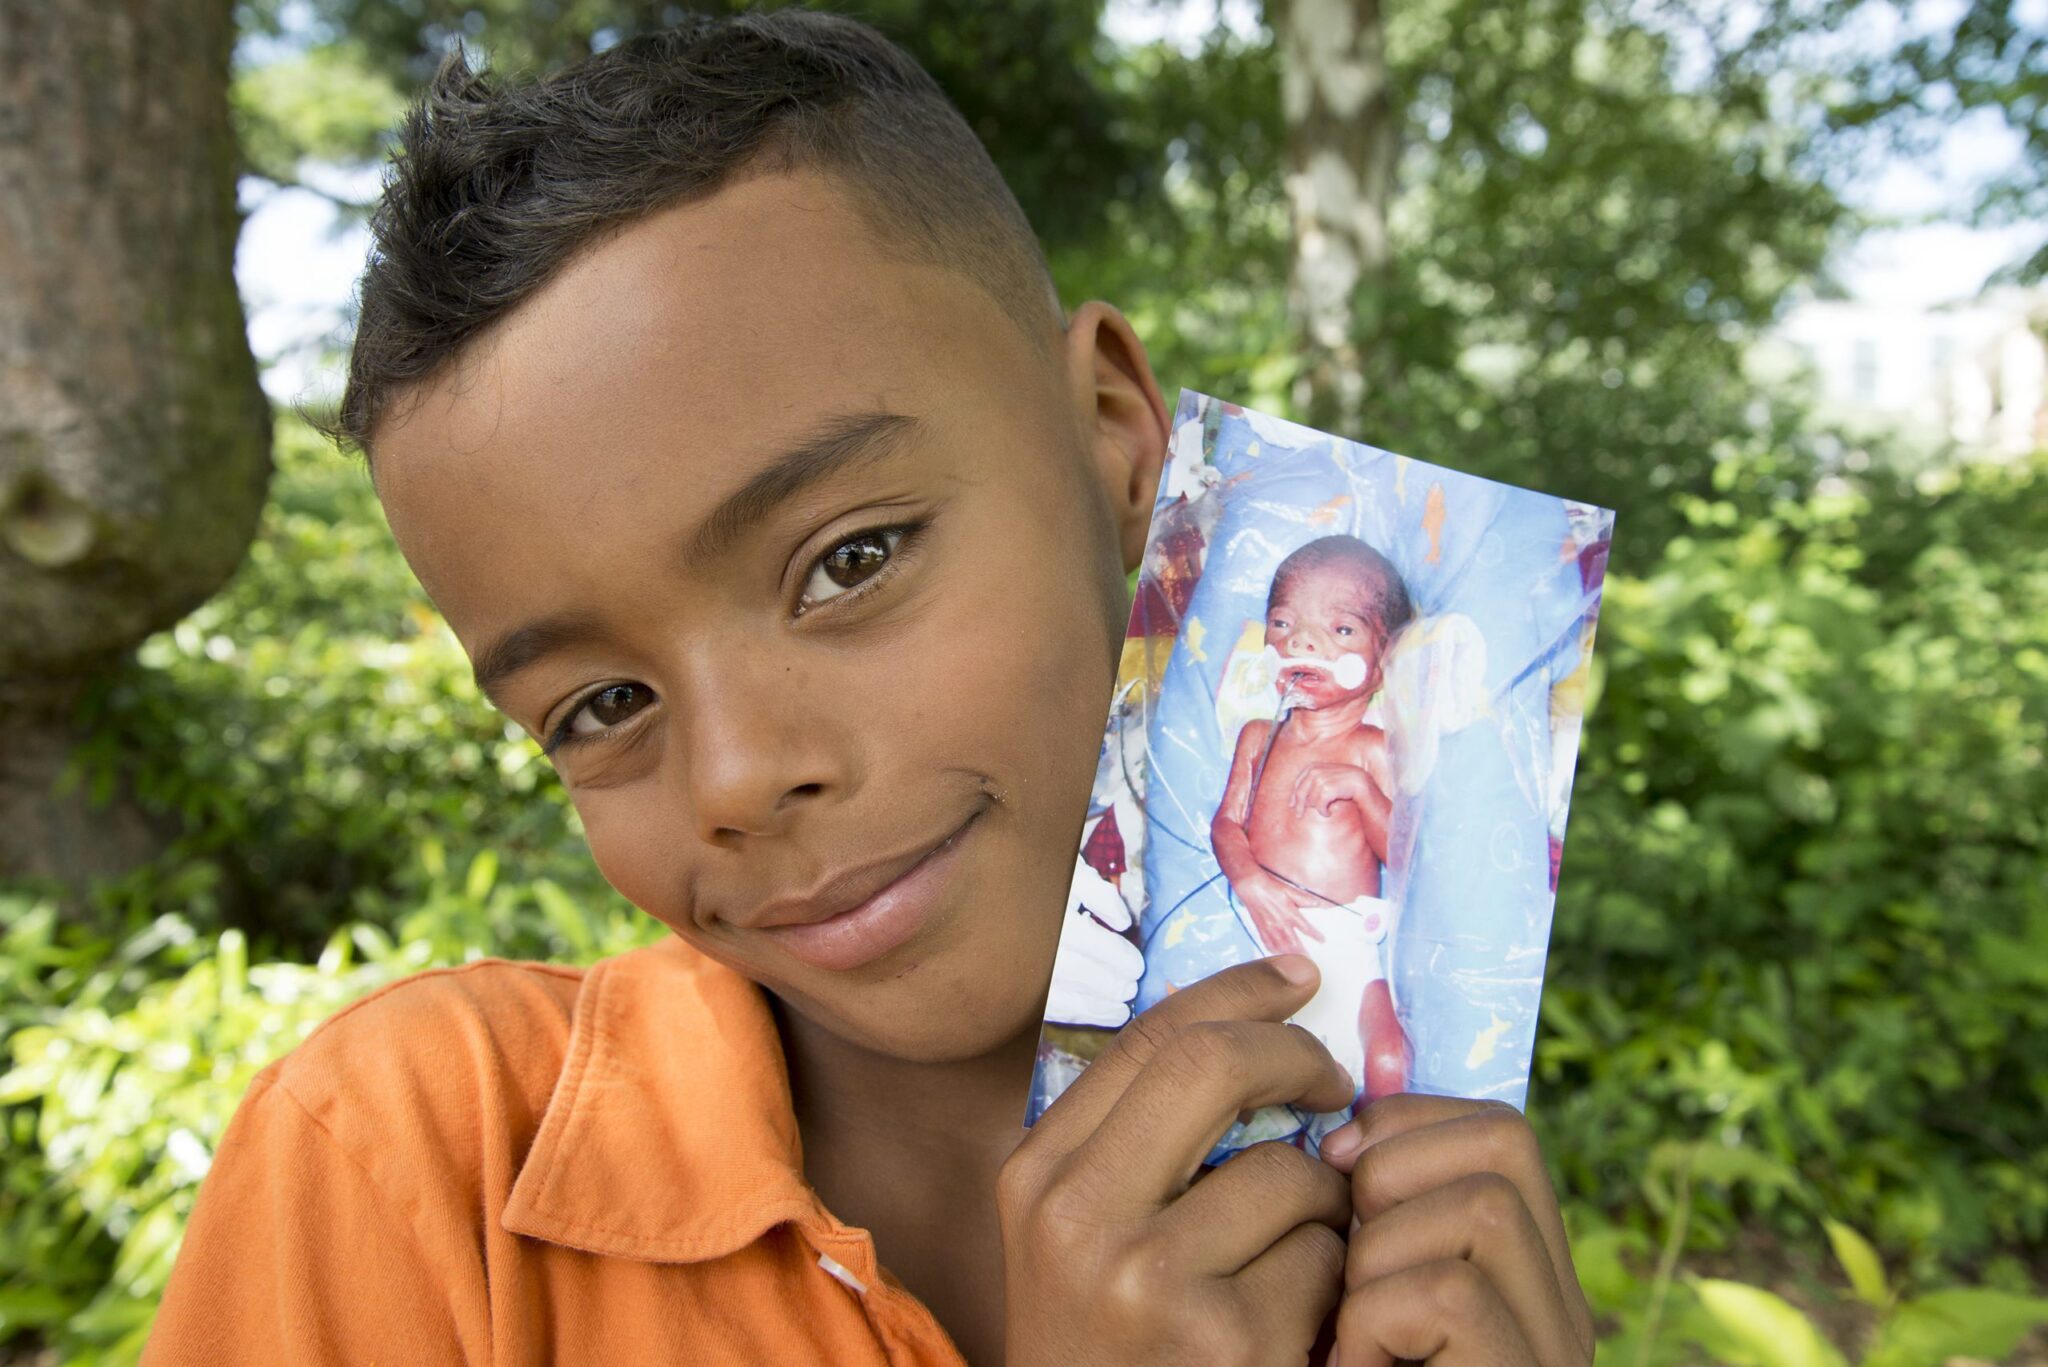 Quincy Surprenant holds a photo of himself in the NICU